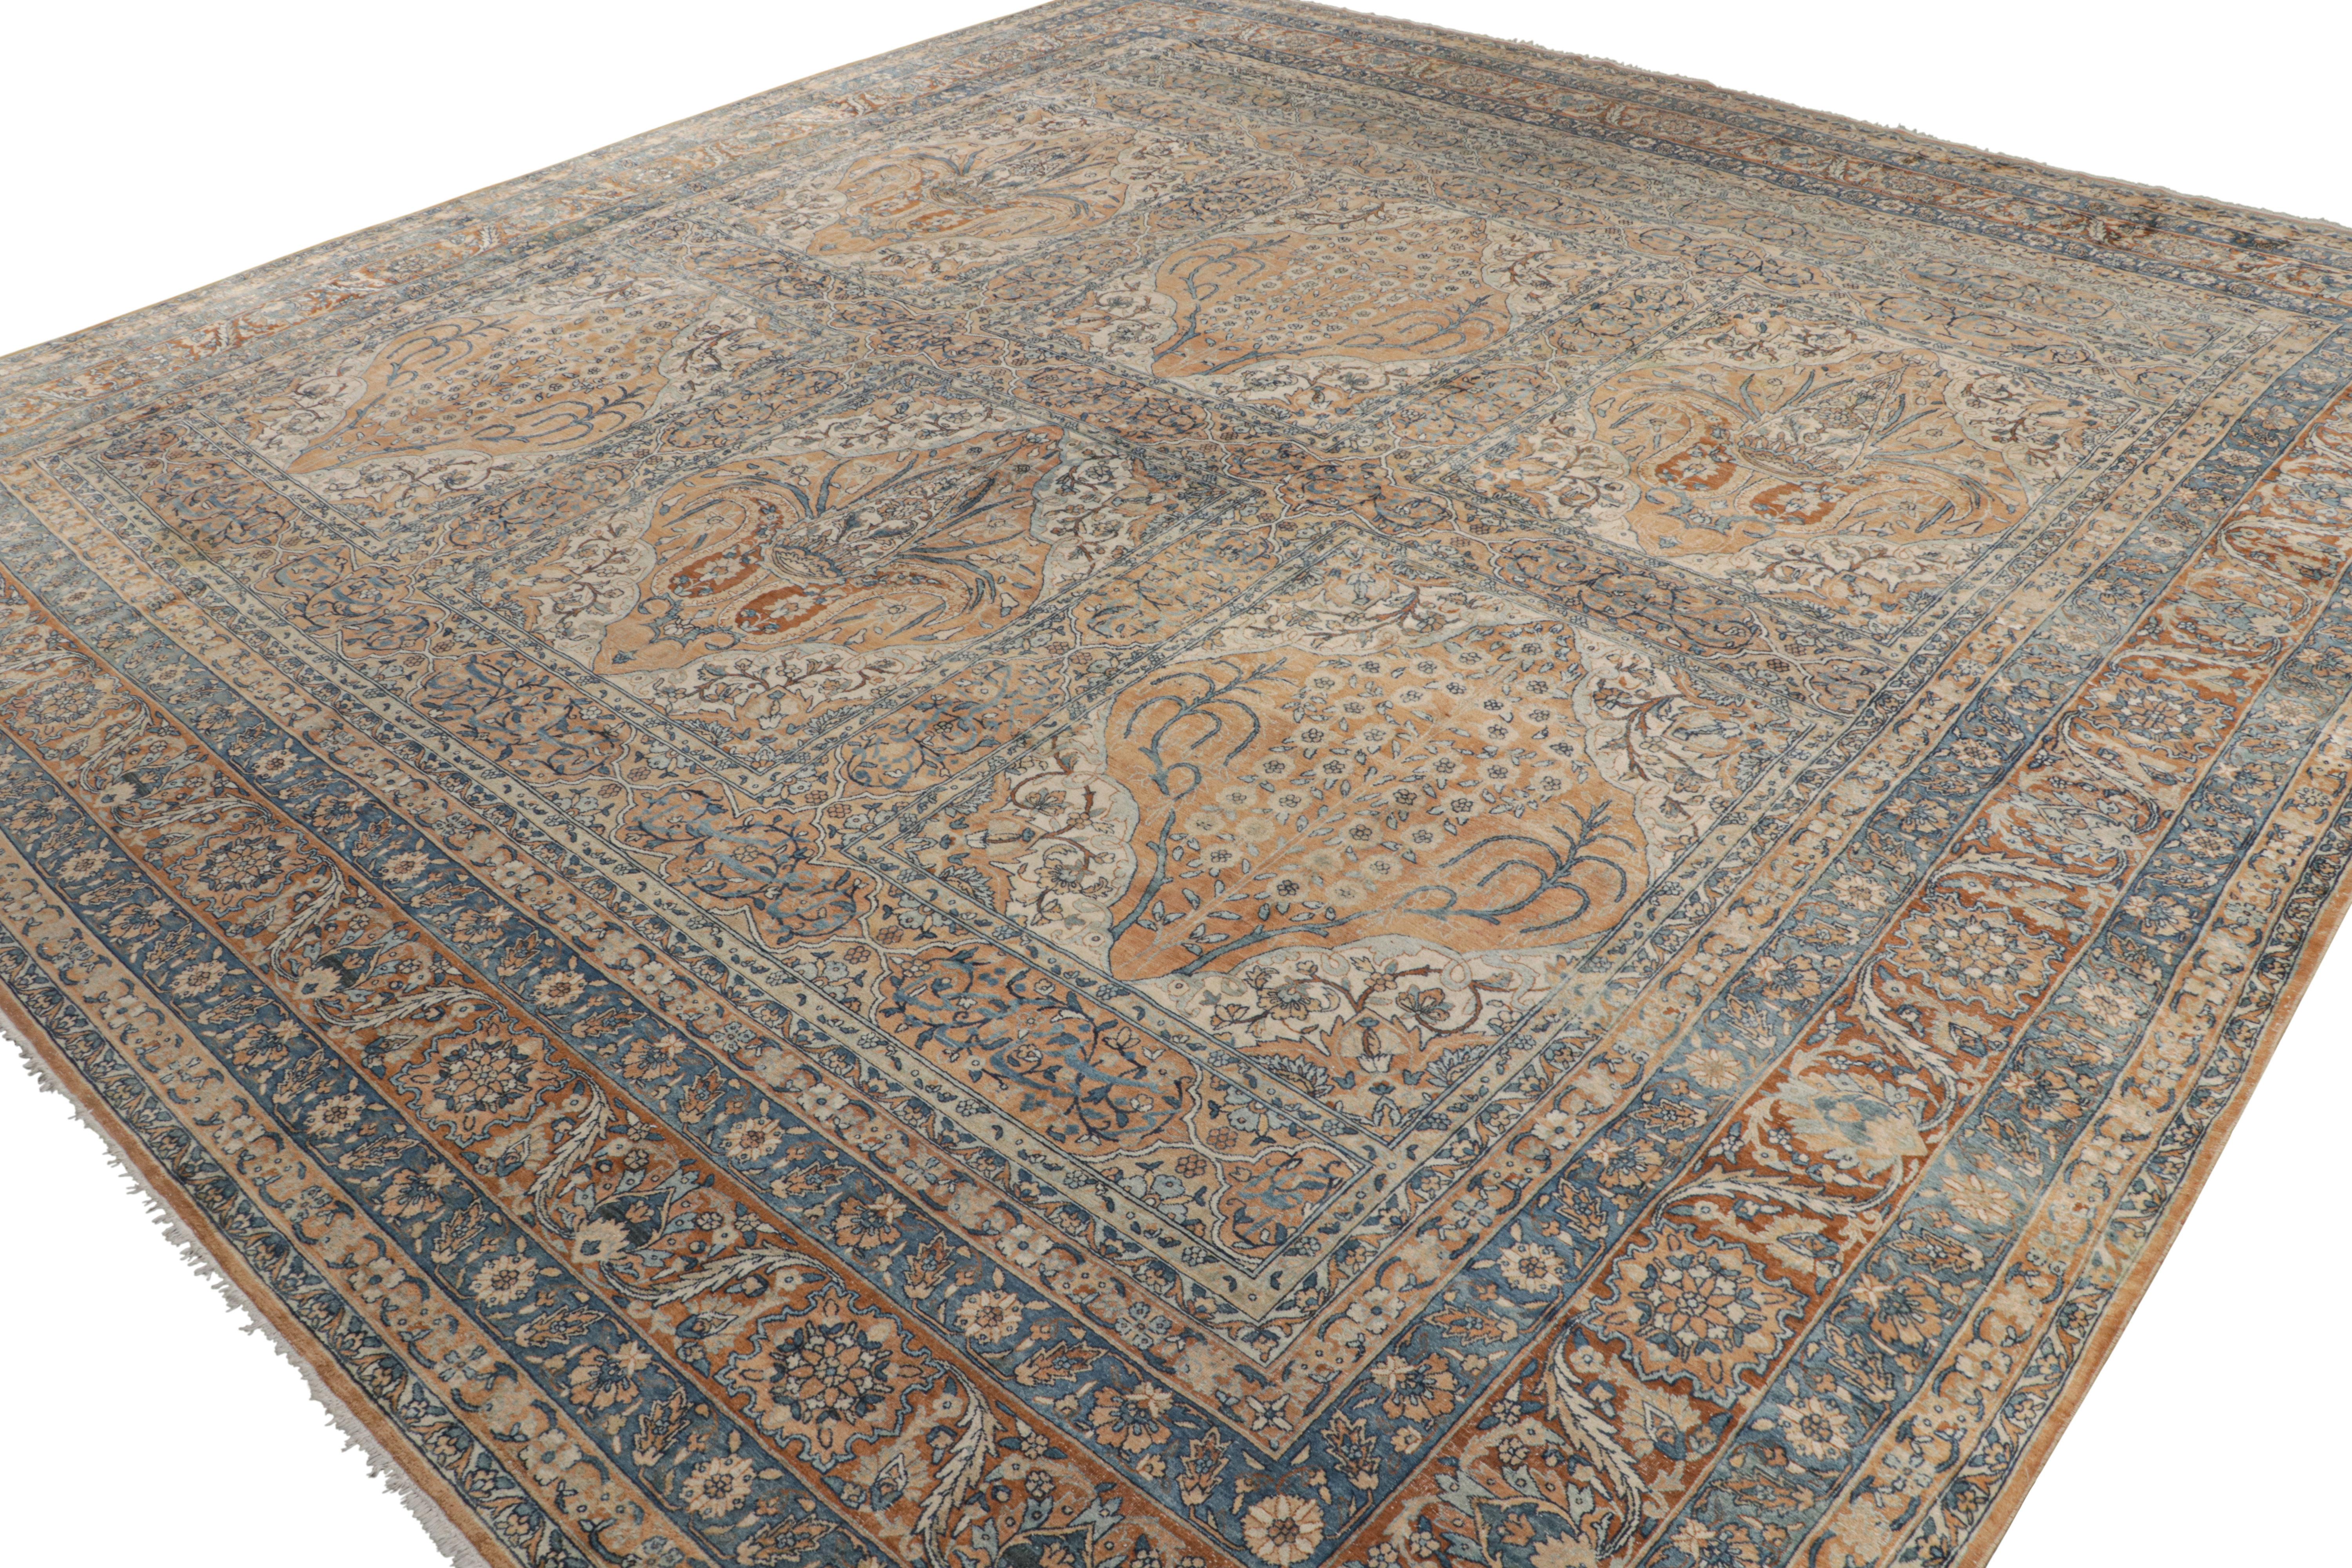 Antique Persian Kerman Rug with Gold and Blue Floral Patterns, from Rug & Kilim In Good Condition For Sale In Long Island City, NY